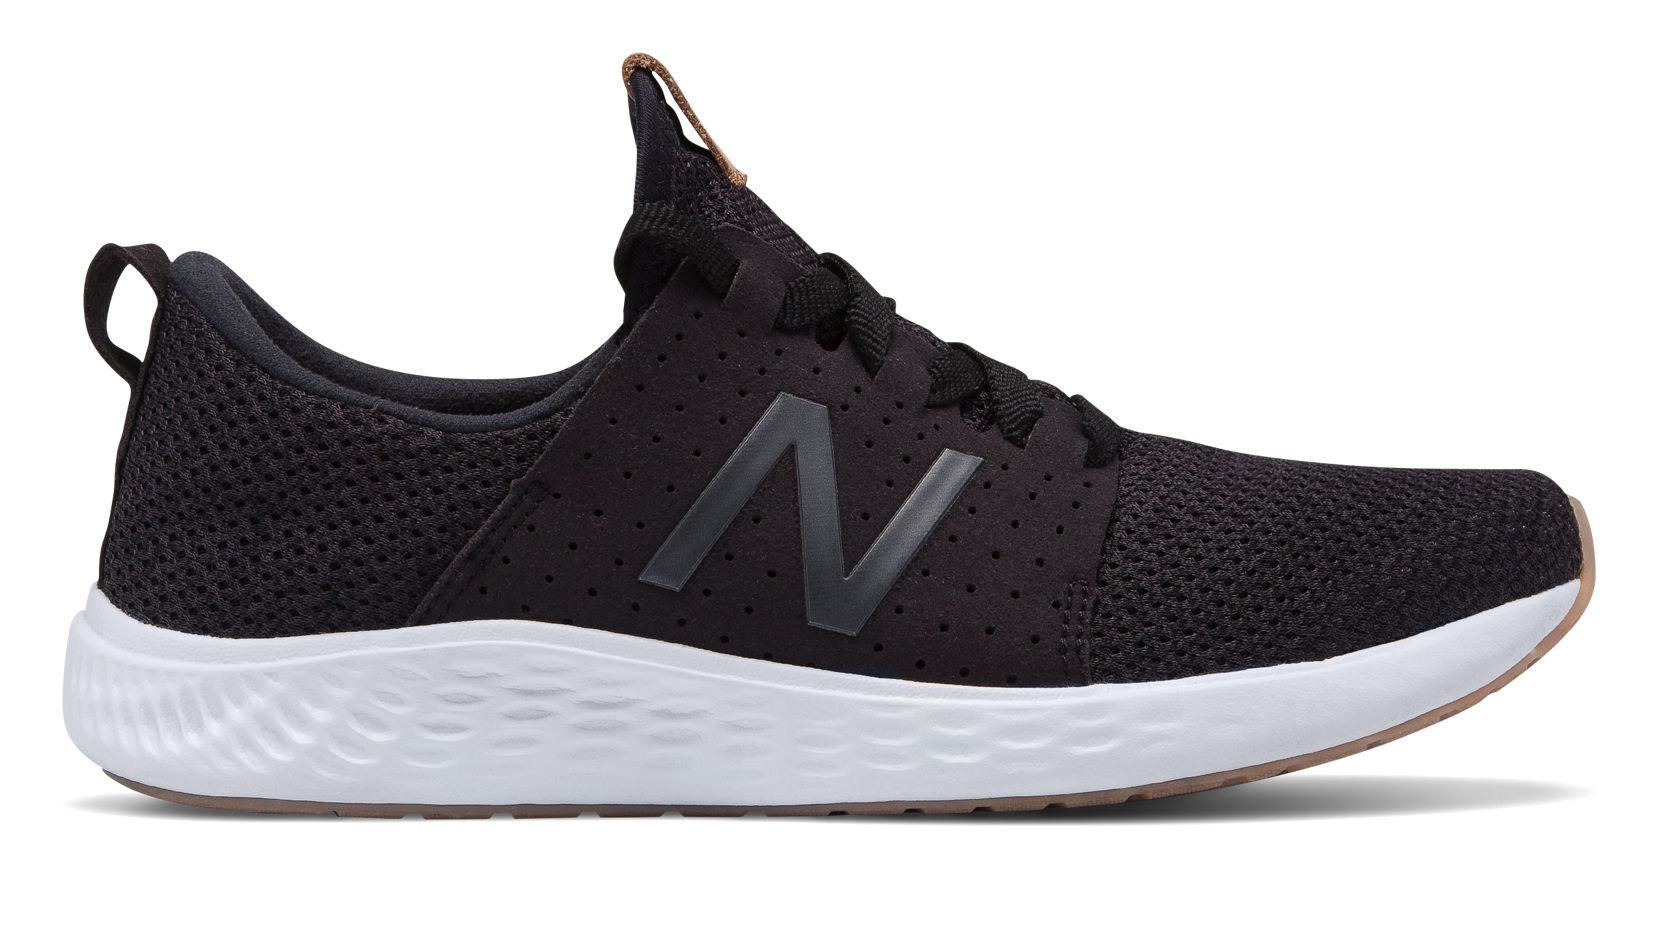 New Balance - Womens WSPTV1 Shoes